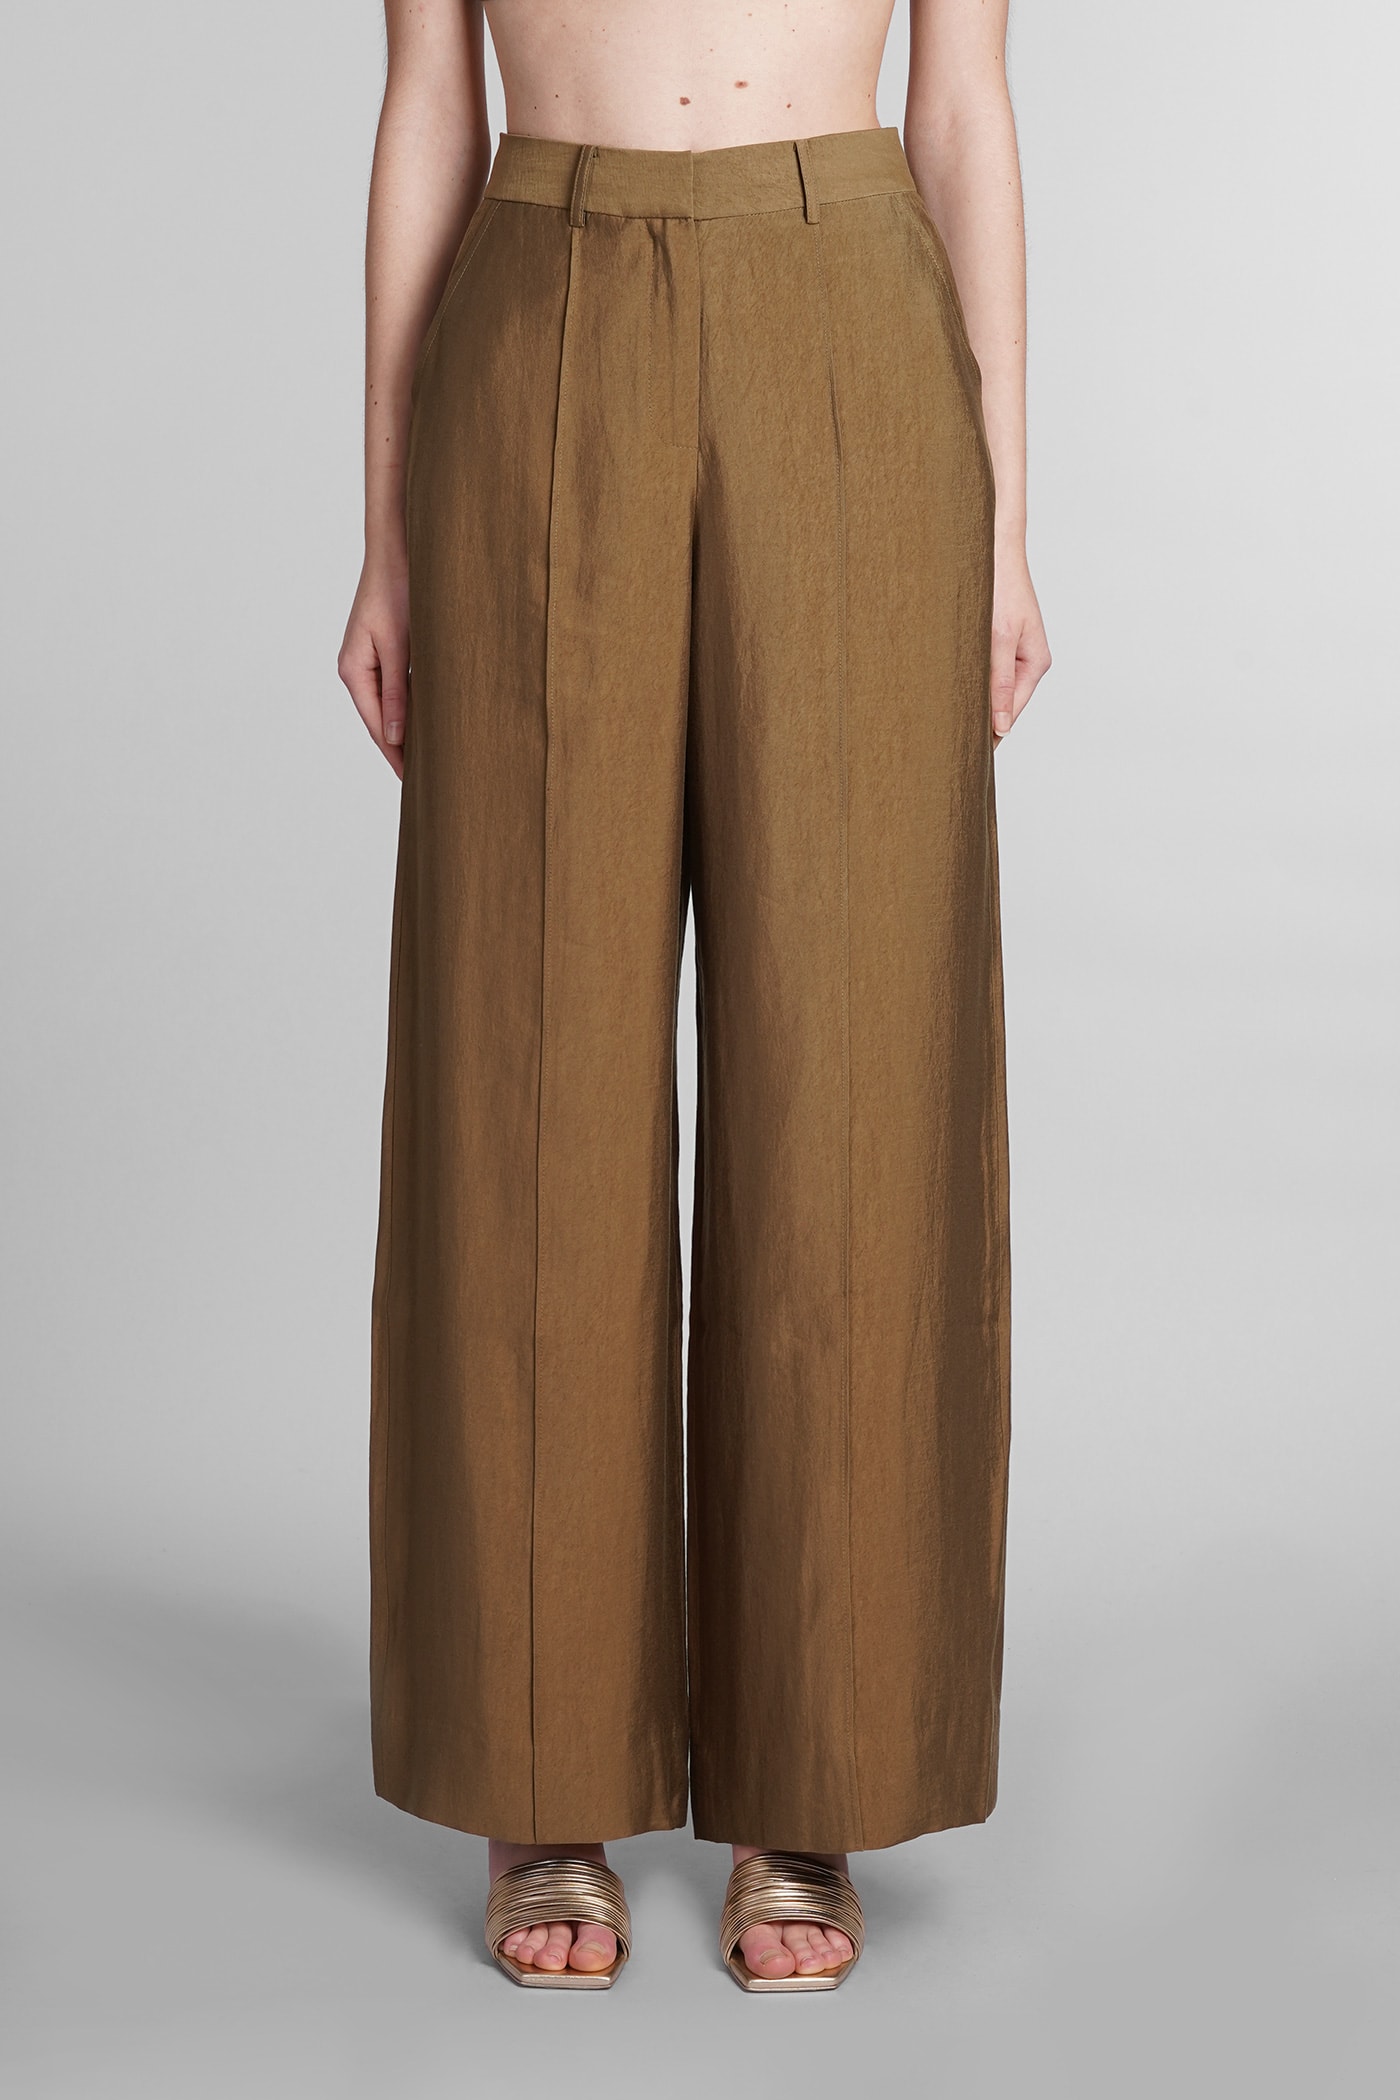 Cult Gaia Janine Trousers In Brown Wool And Polyester